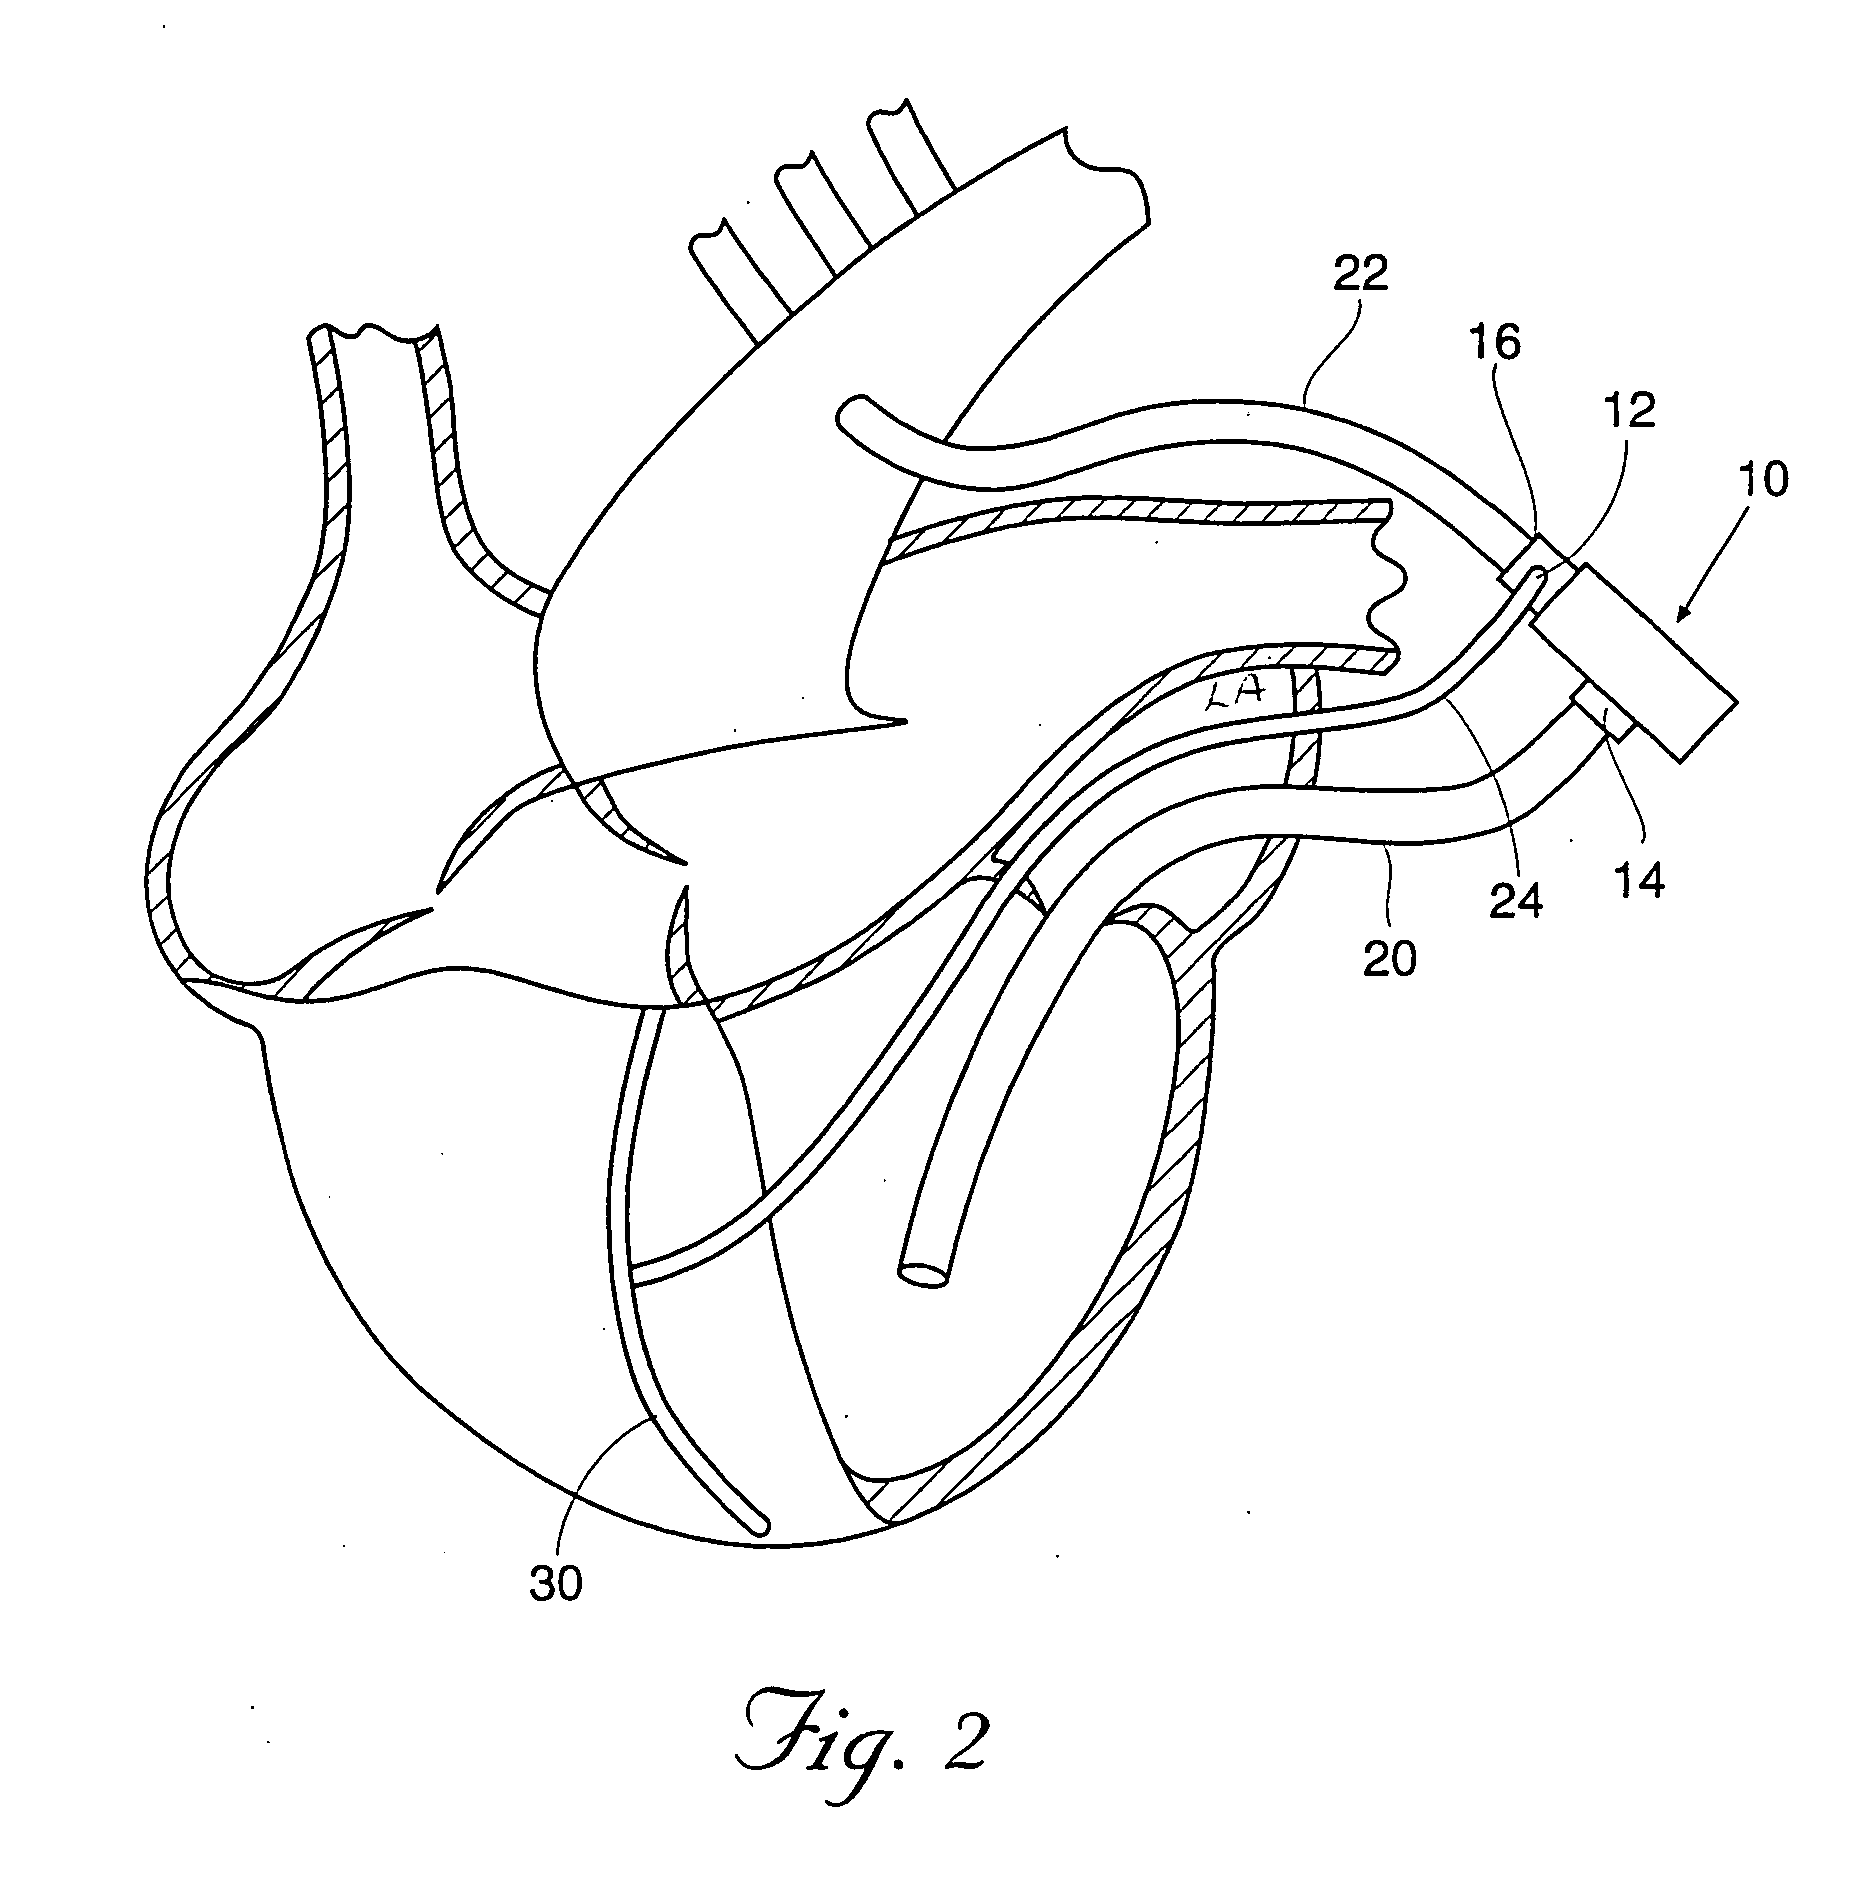 Supplemental port for catheter perfusion of surgical site and methods of use